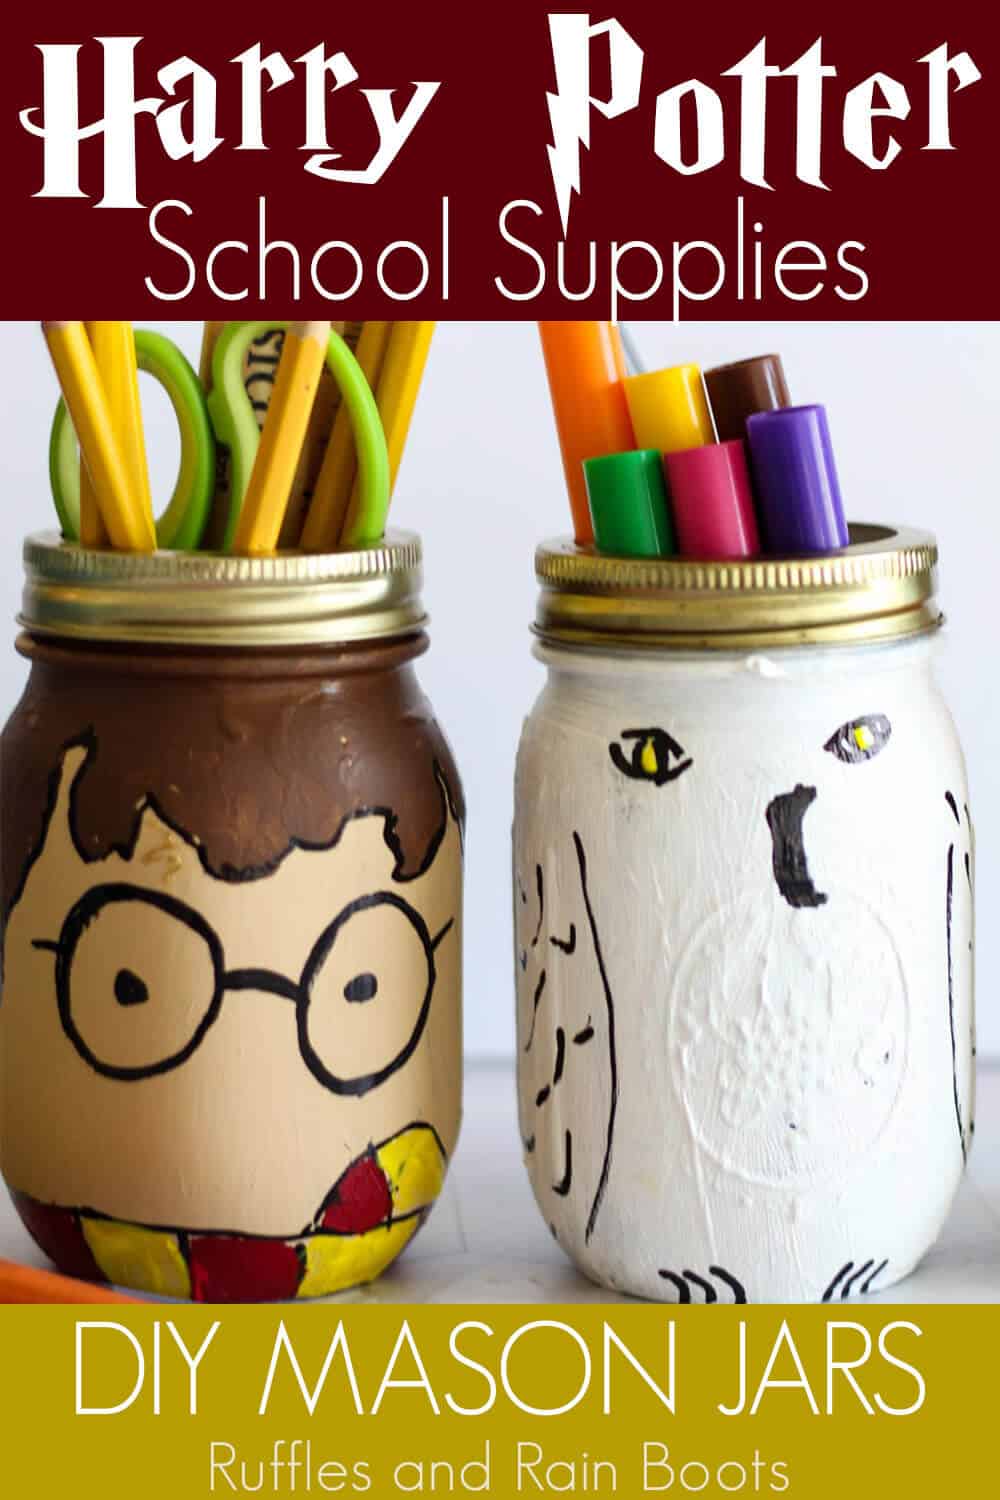 harry potter mason jar craft idea for school supplies with text which reads harry potter school supplies diy mason jars